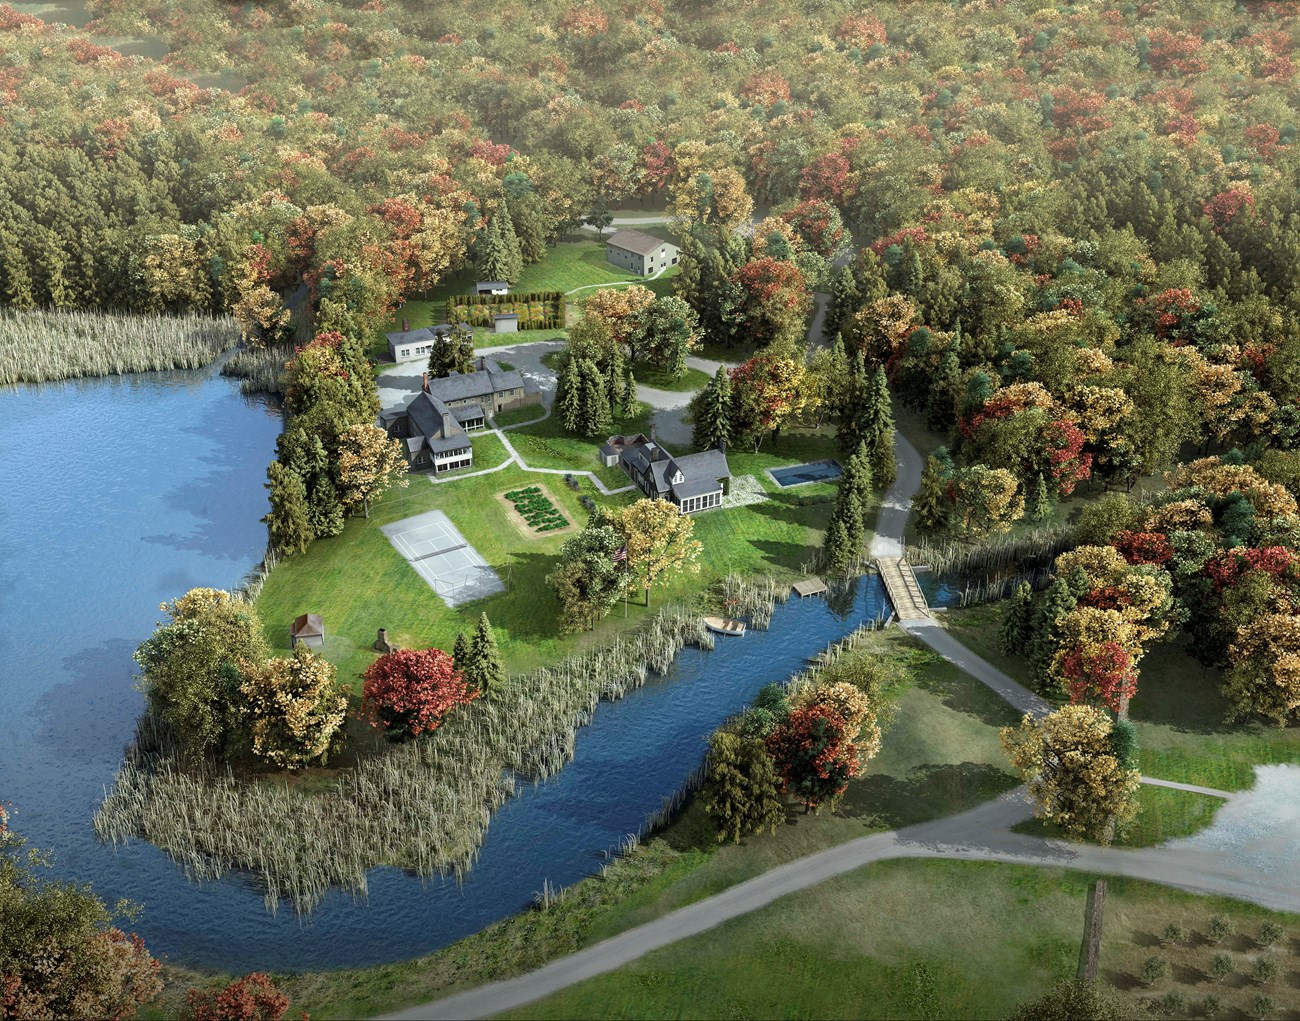 Artistic rendering of a birdseye view of Val-Kill surrounded by a pond that bends around three sides creating a peninsula. A forest extends into the distance. The view includes a parking lot, roads, paths, gardens a swimming pool, tennis court and several